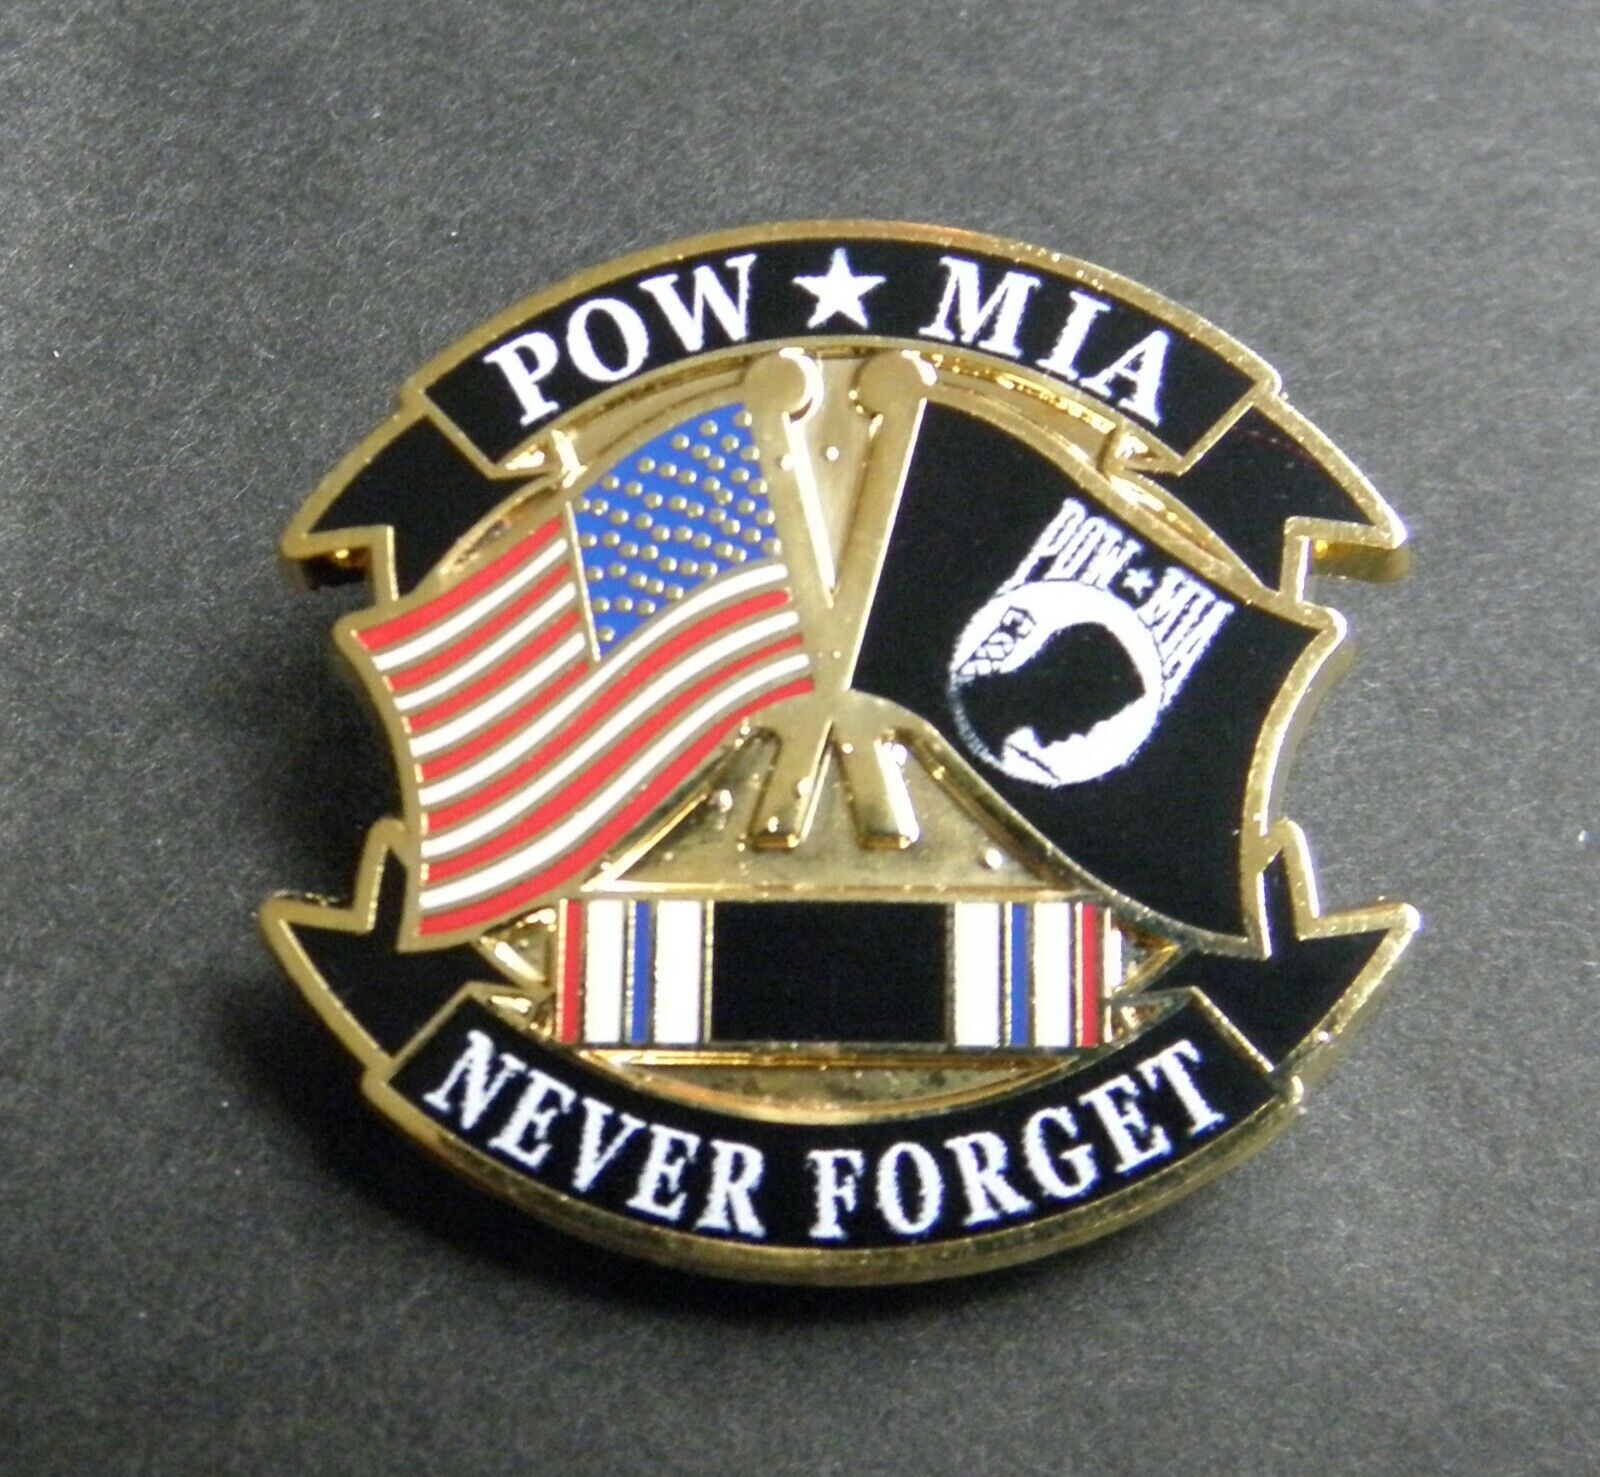 POW MIA USA SHIELD LAPEL PIN BADGE 1.25 INCHES NEVER FORGET